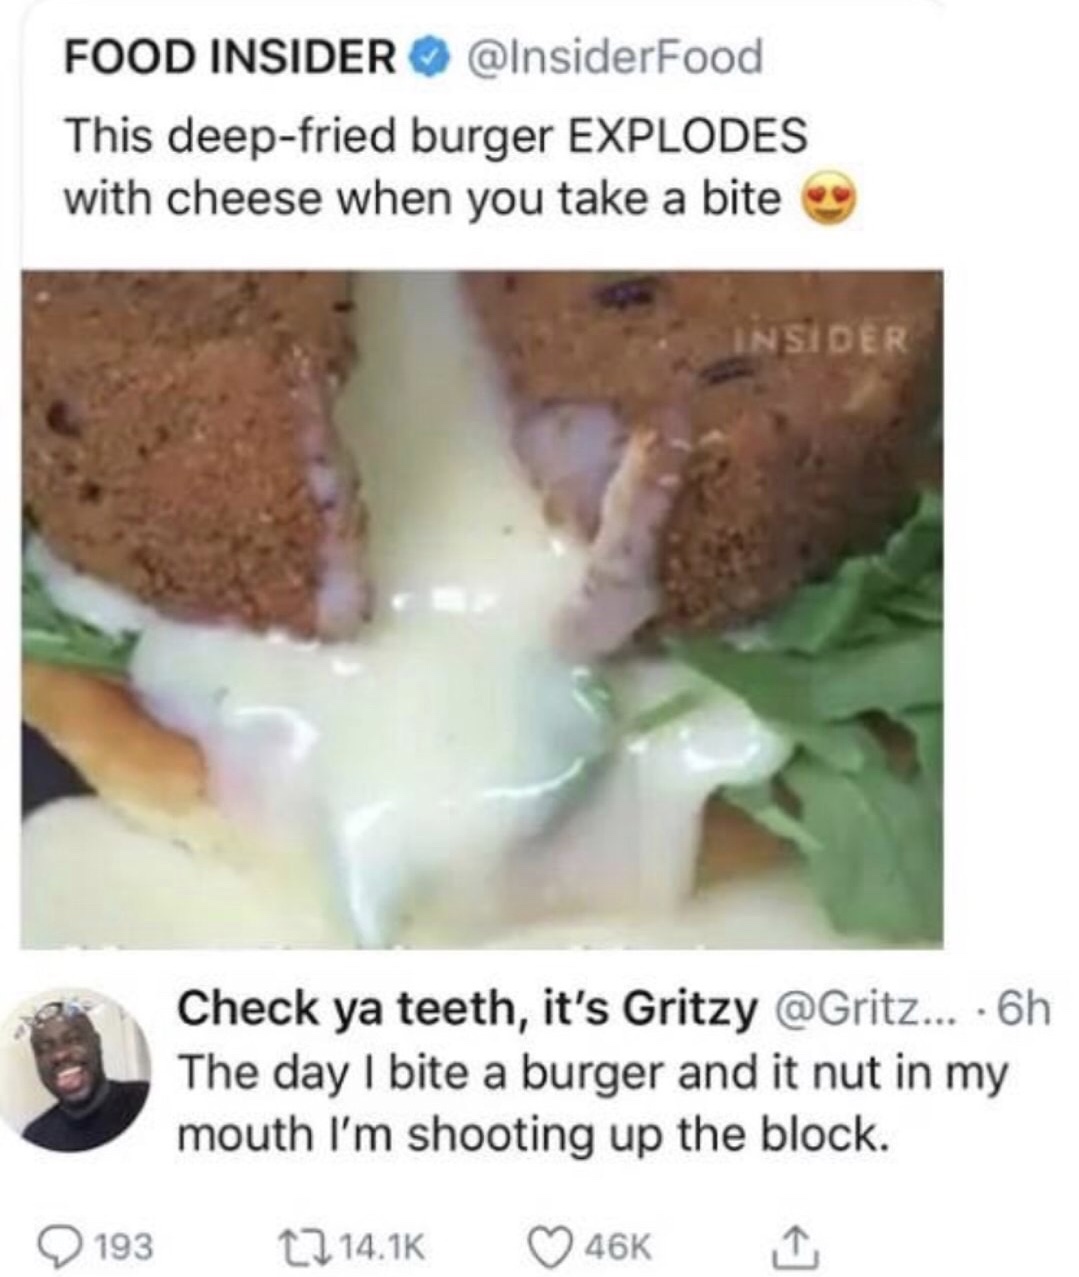 meme stream - they kinda fresh doe - Food Insider This deepfried burger Explodes with cheese when you take a bite Insider Check ya teeth, it's Gritzy ... 6h The day I bite a burger and it nut in my mouth I'm shooting up the block. 193 12 46K I